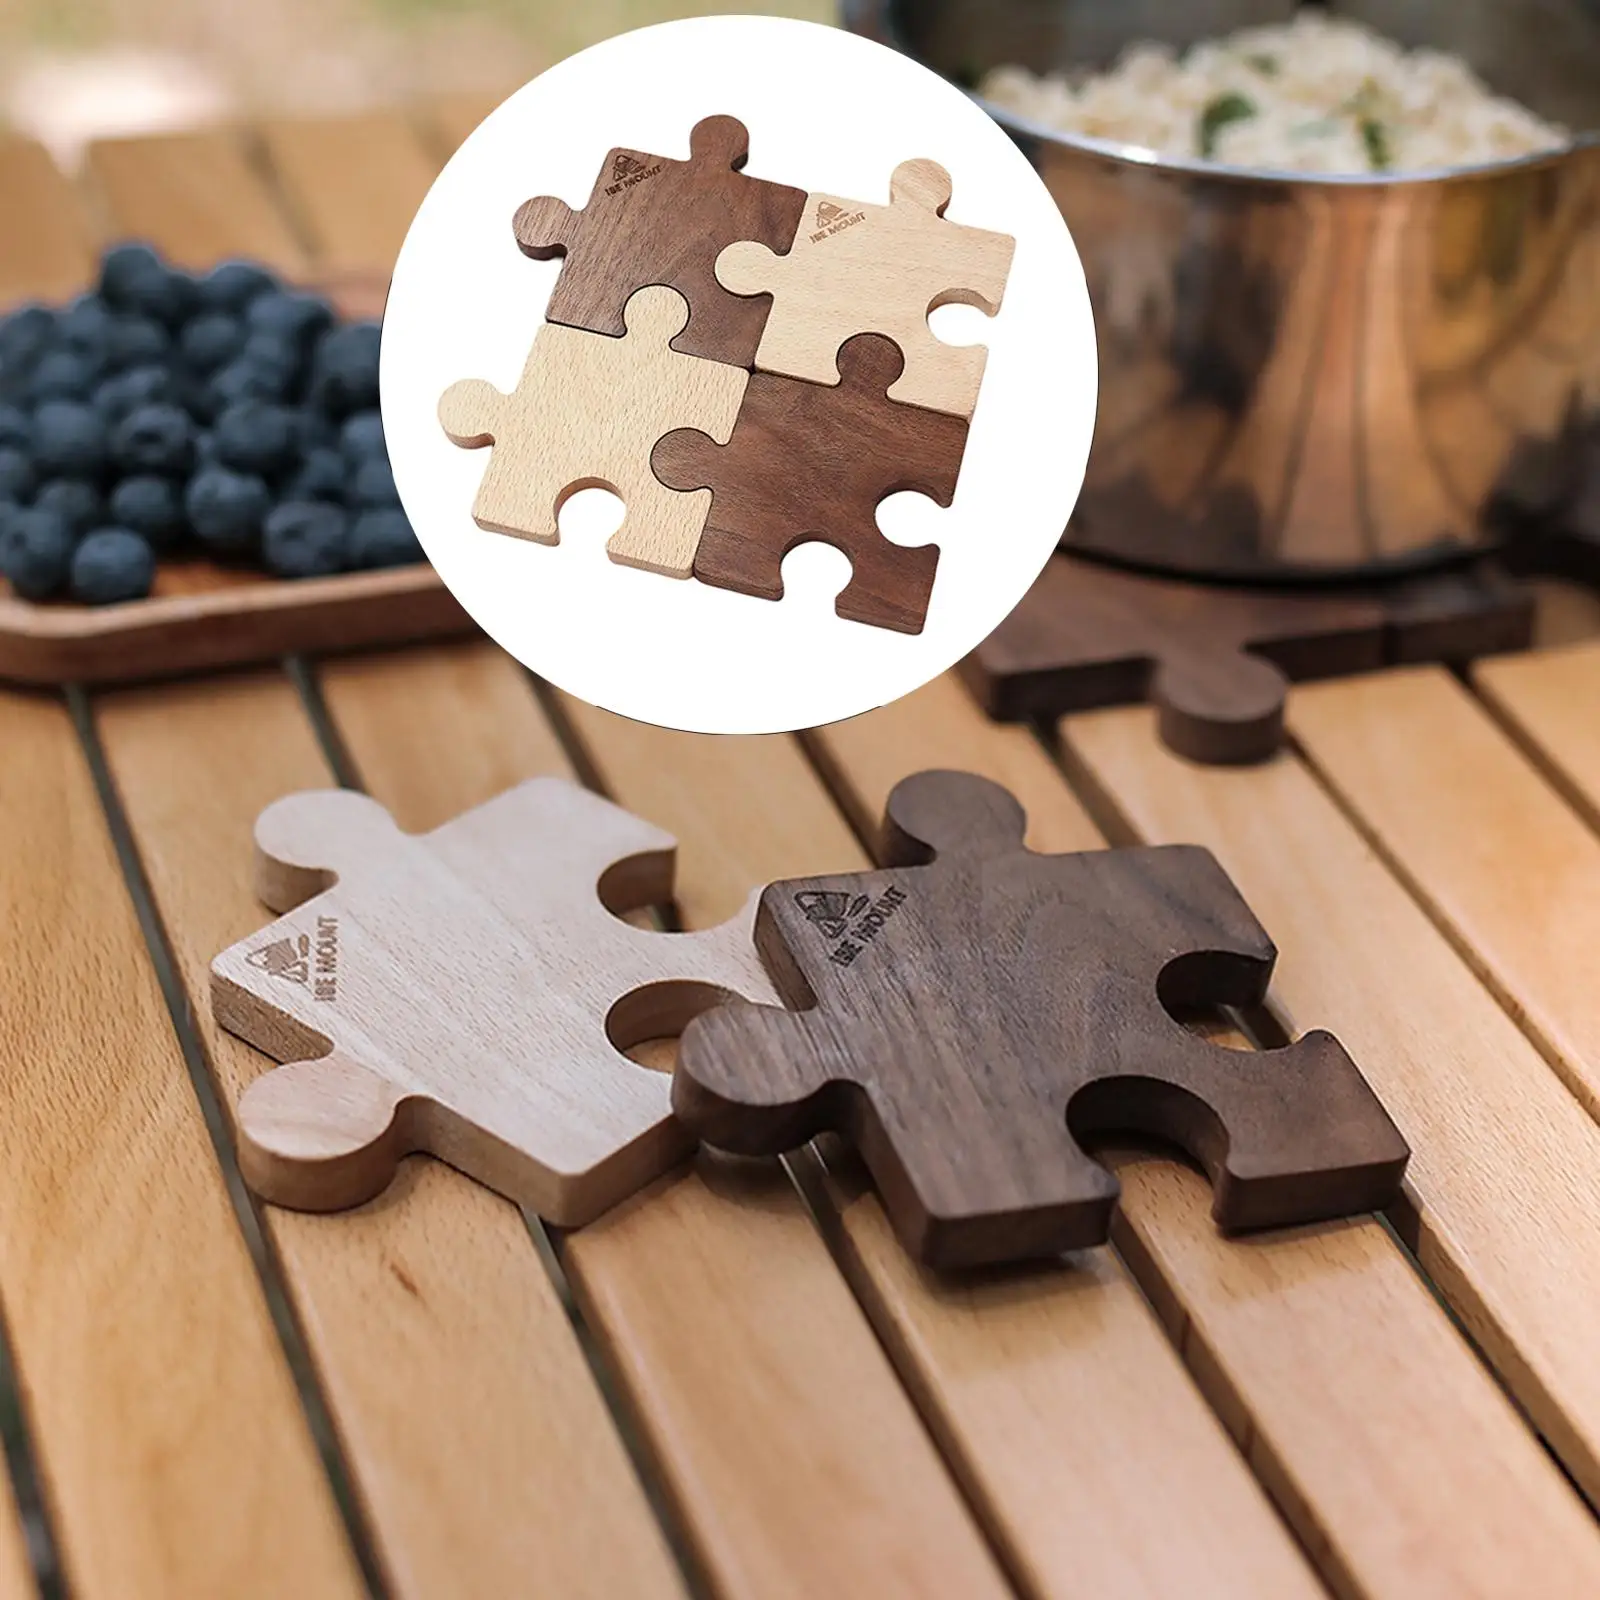 4Pcs Wooden Coasters Jigsaw Puzzle Design Walnut Wood Beech Wood Durable Reusable Drinkware Tea Cup Pad for Office Dining Room